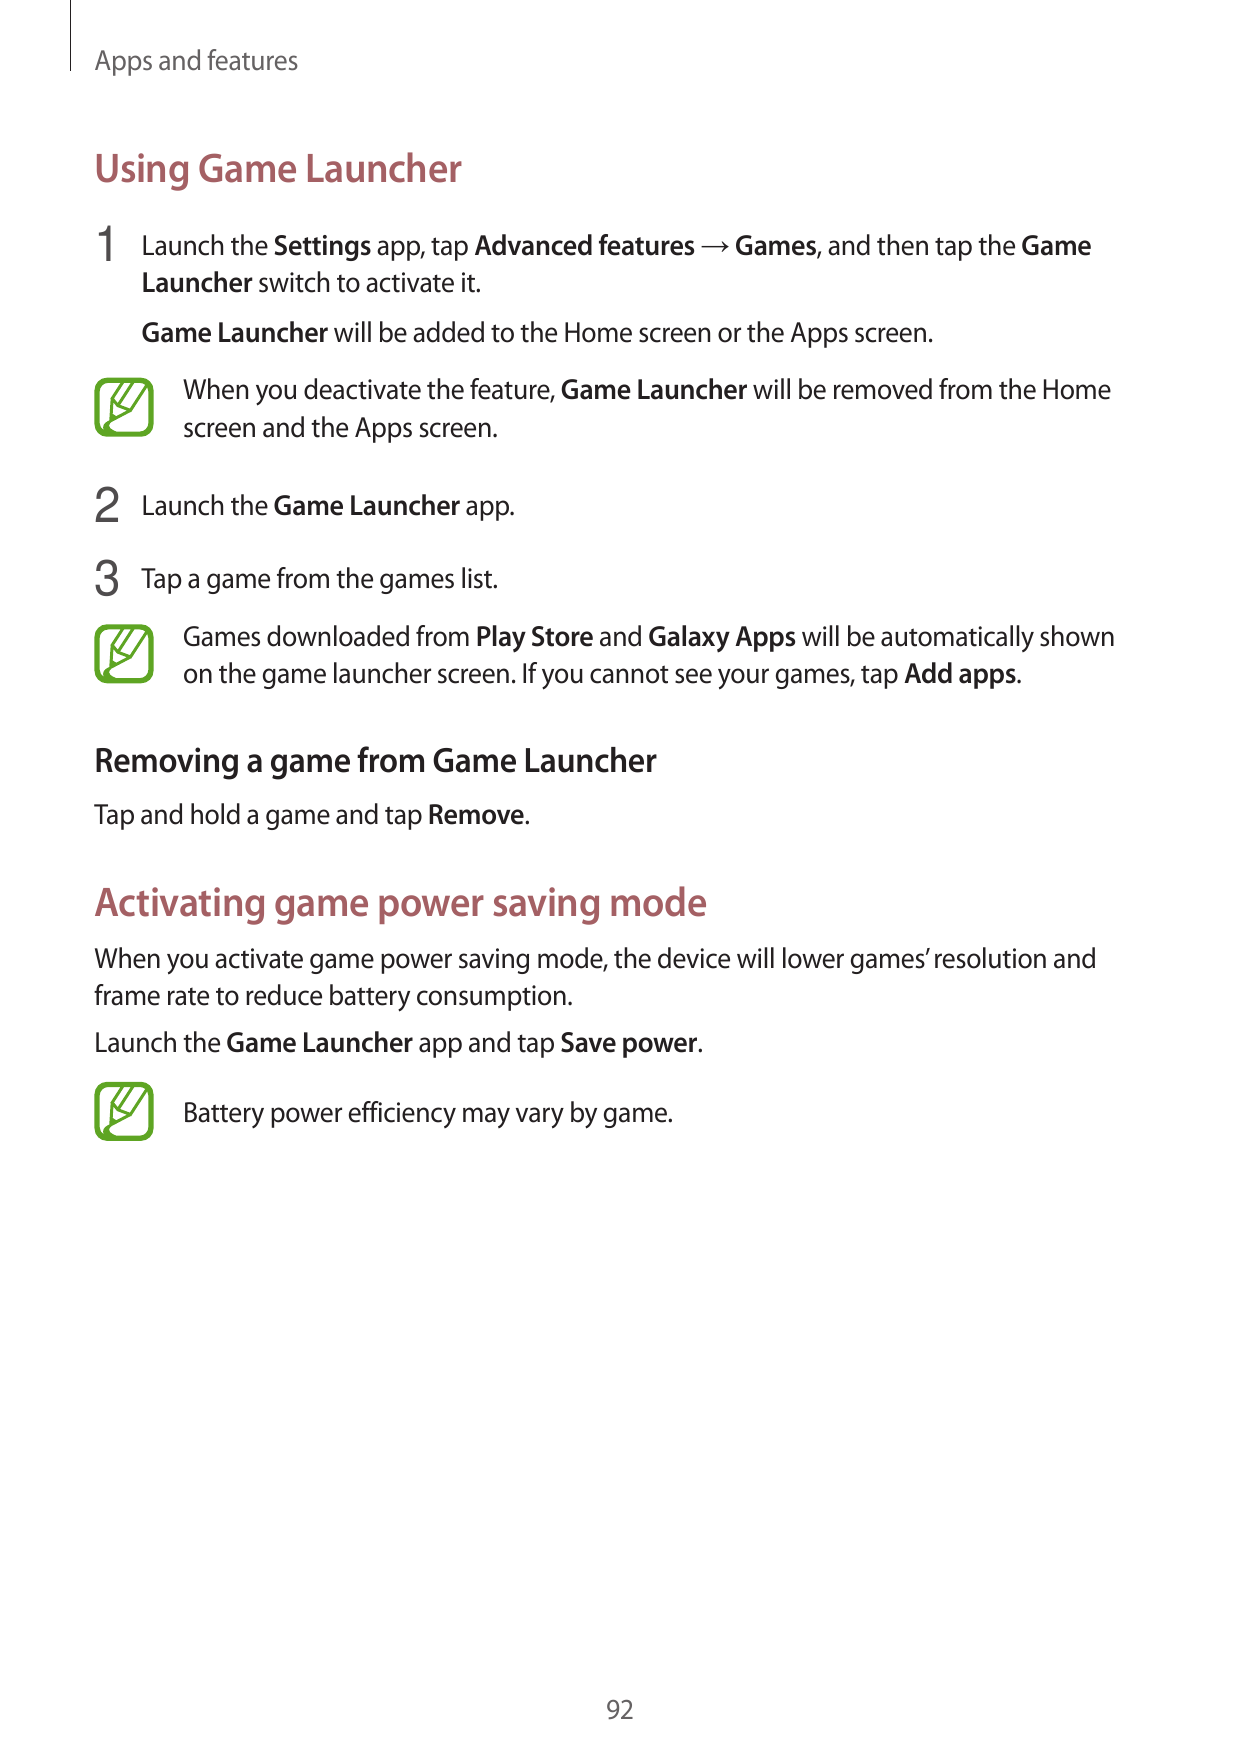 Apps and featuresUsing Game Launcher1 Launch the Settings app, tap Advanced features → Games, and then tap the GameLauncher swit